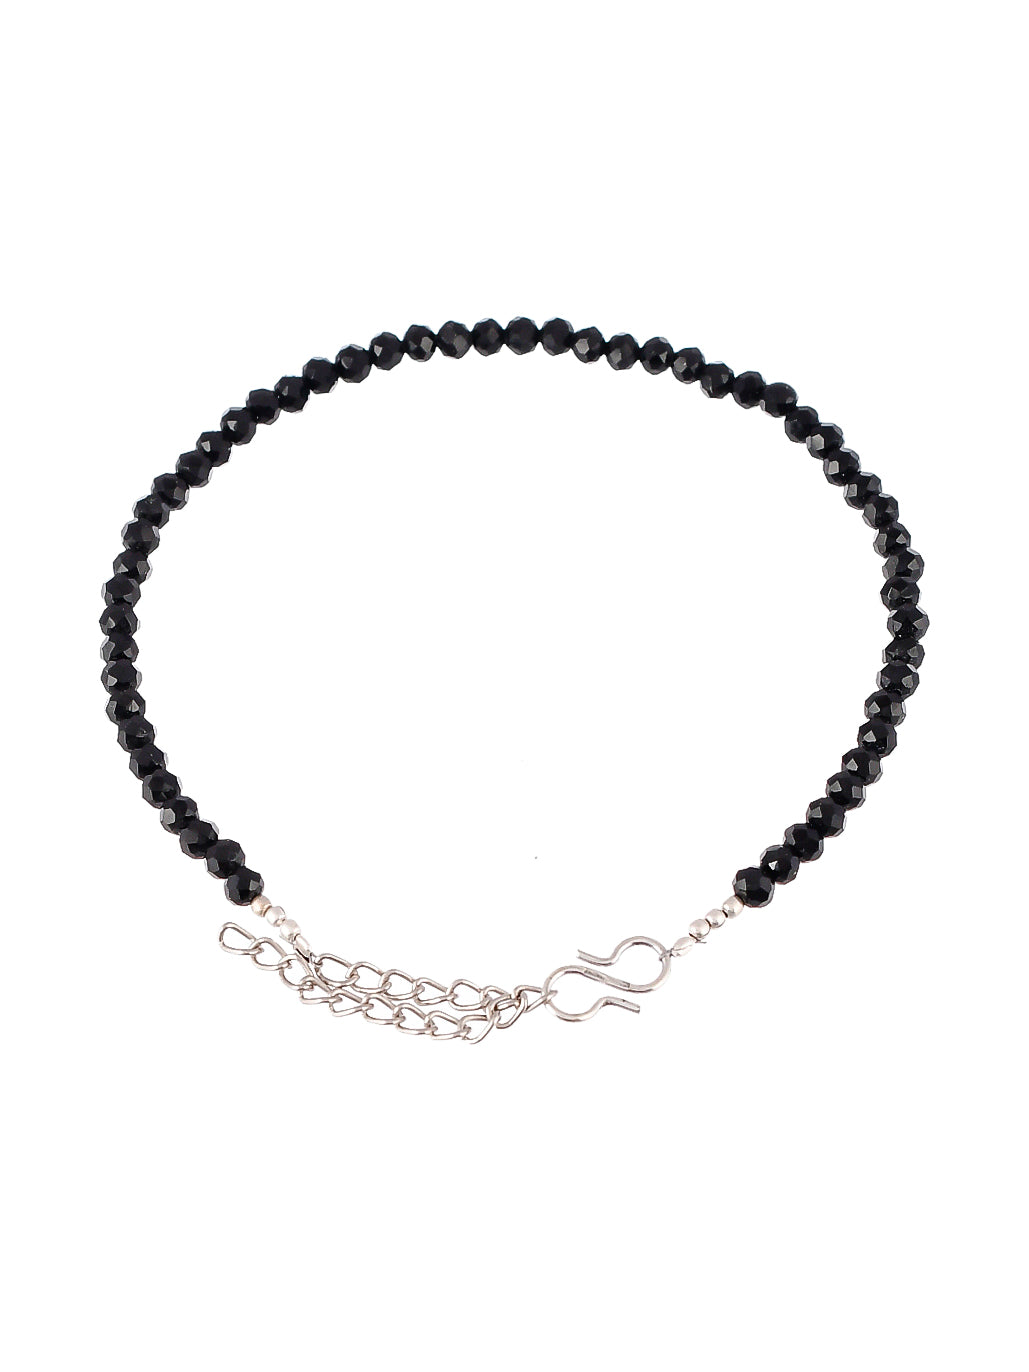 Black Onyx Faceted Beads Anklet